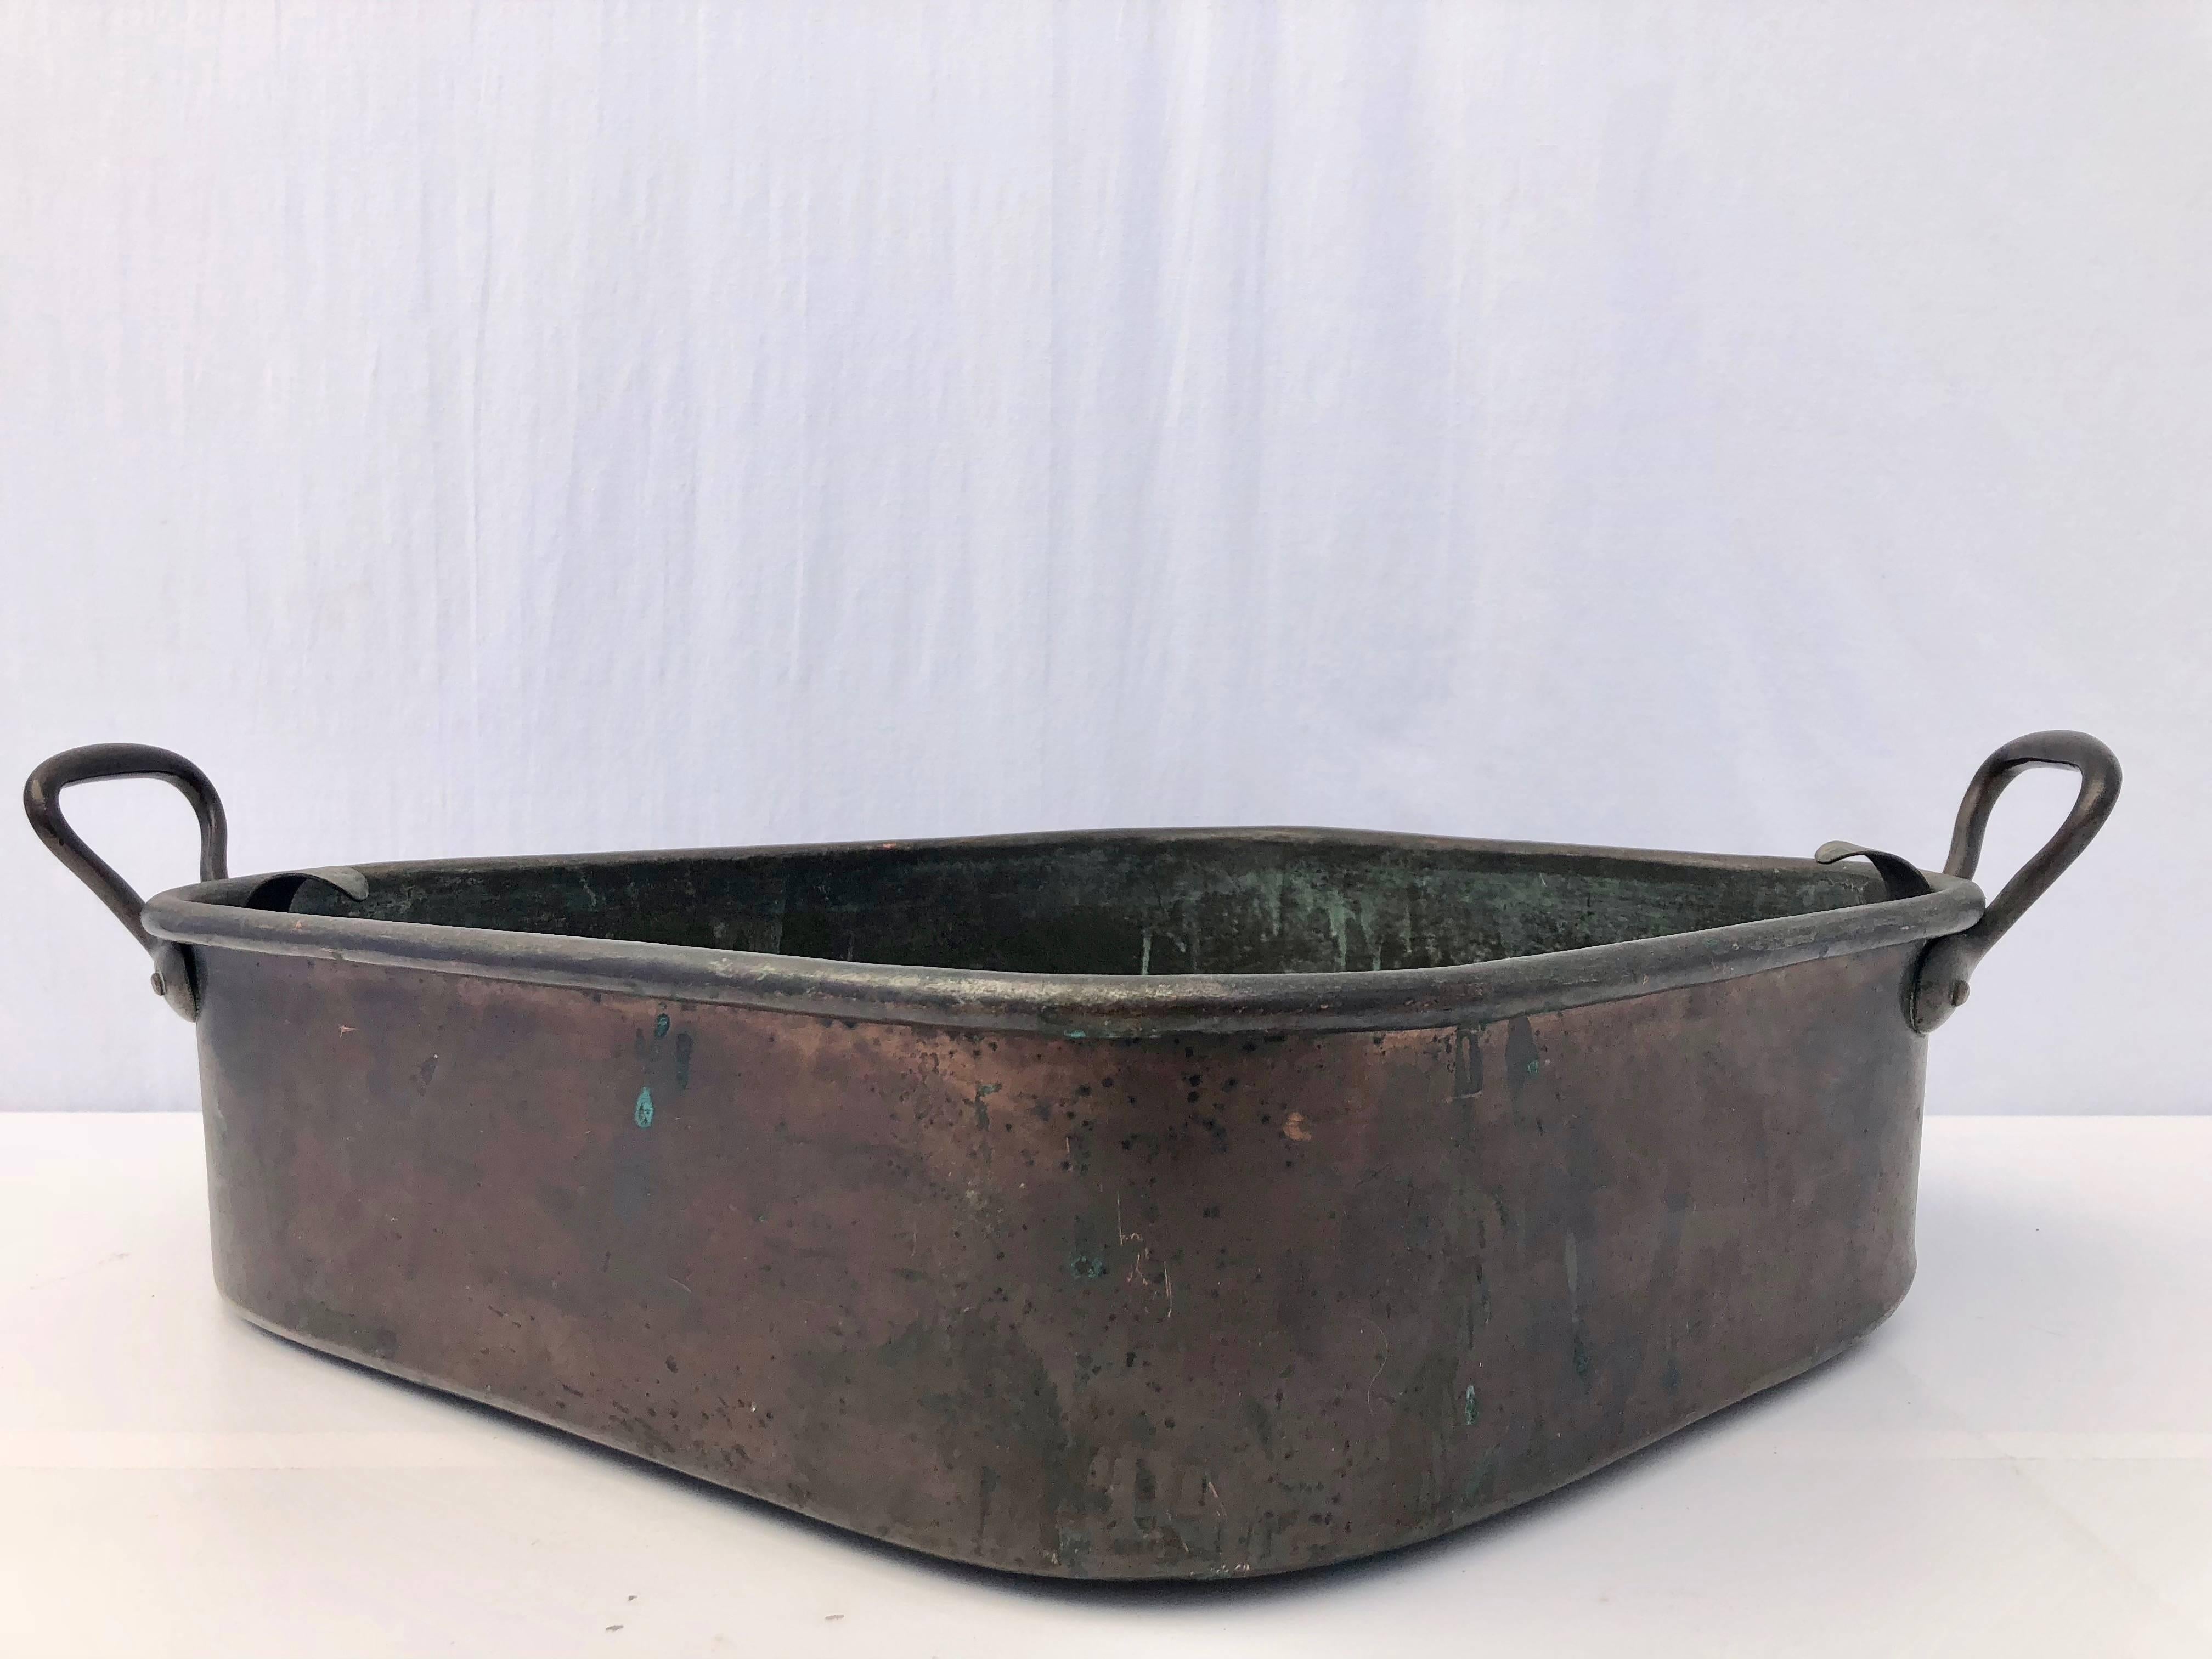 Repoussé French Copper Turbot Cooker Pan, Wrought Iron Handles with Strainer, 1700s For Sale